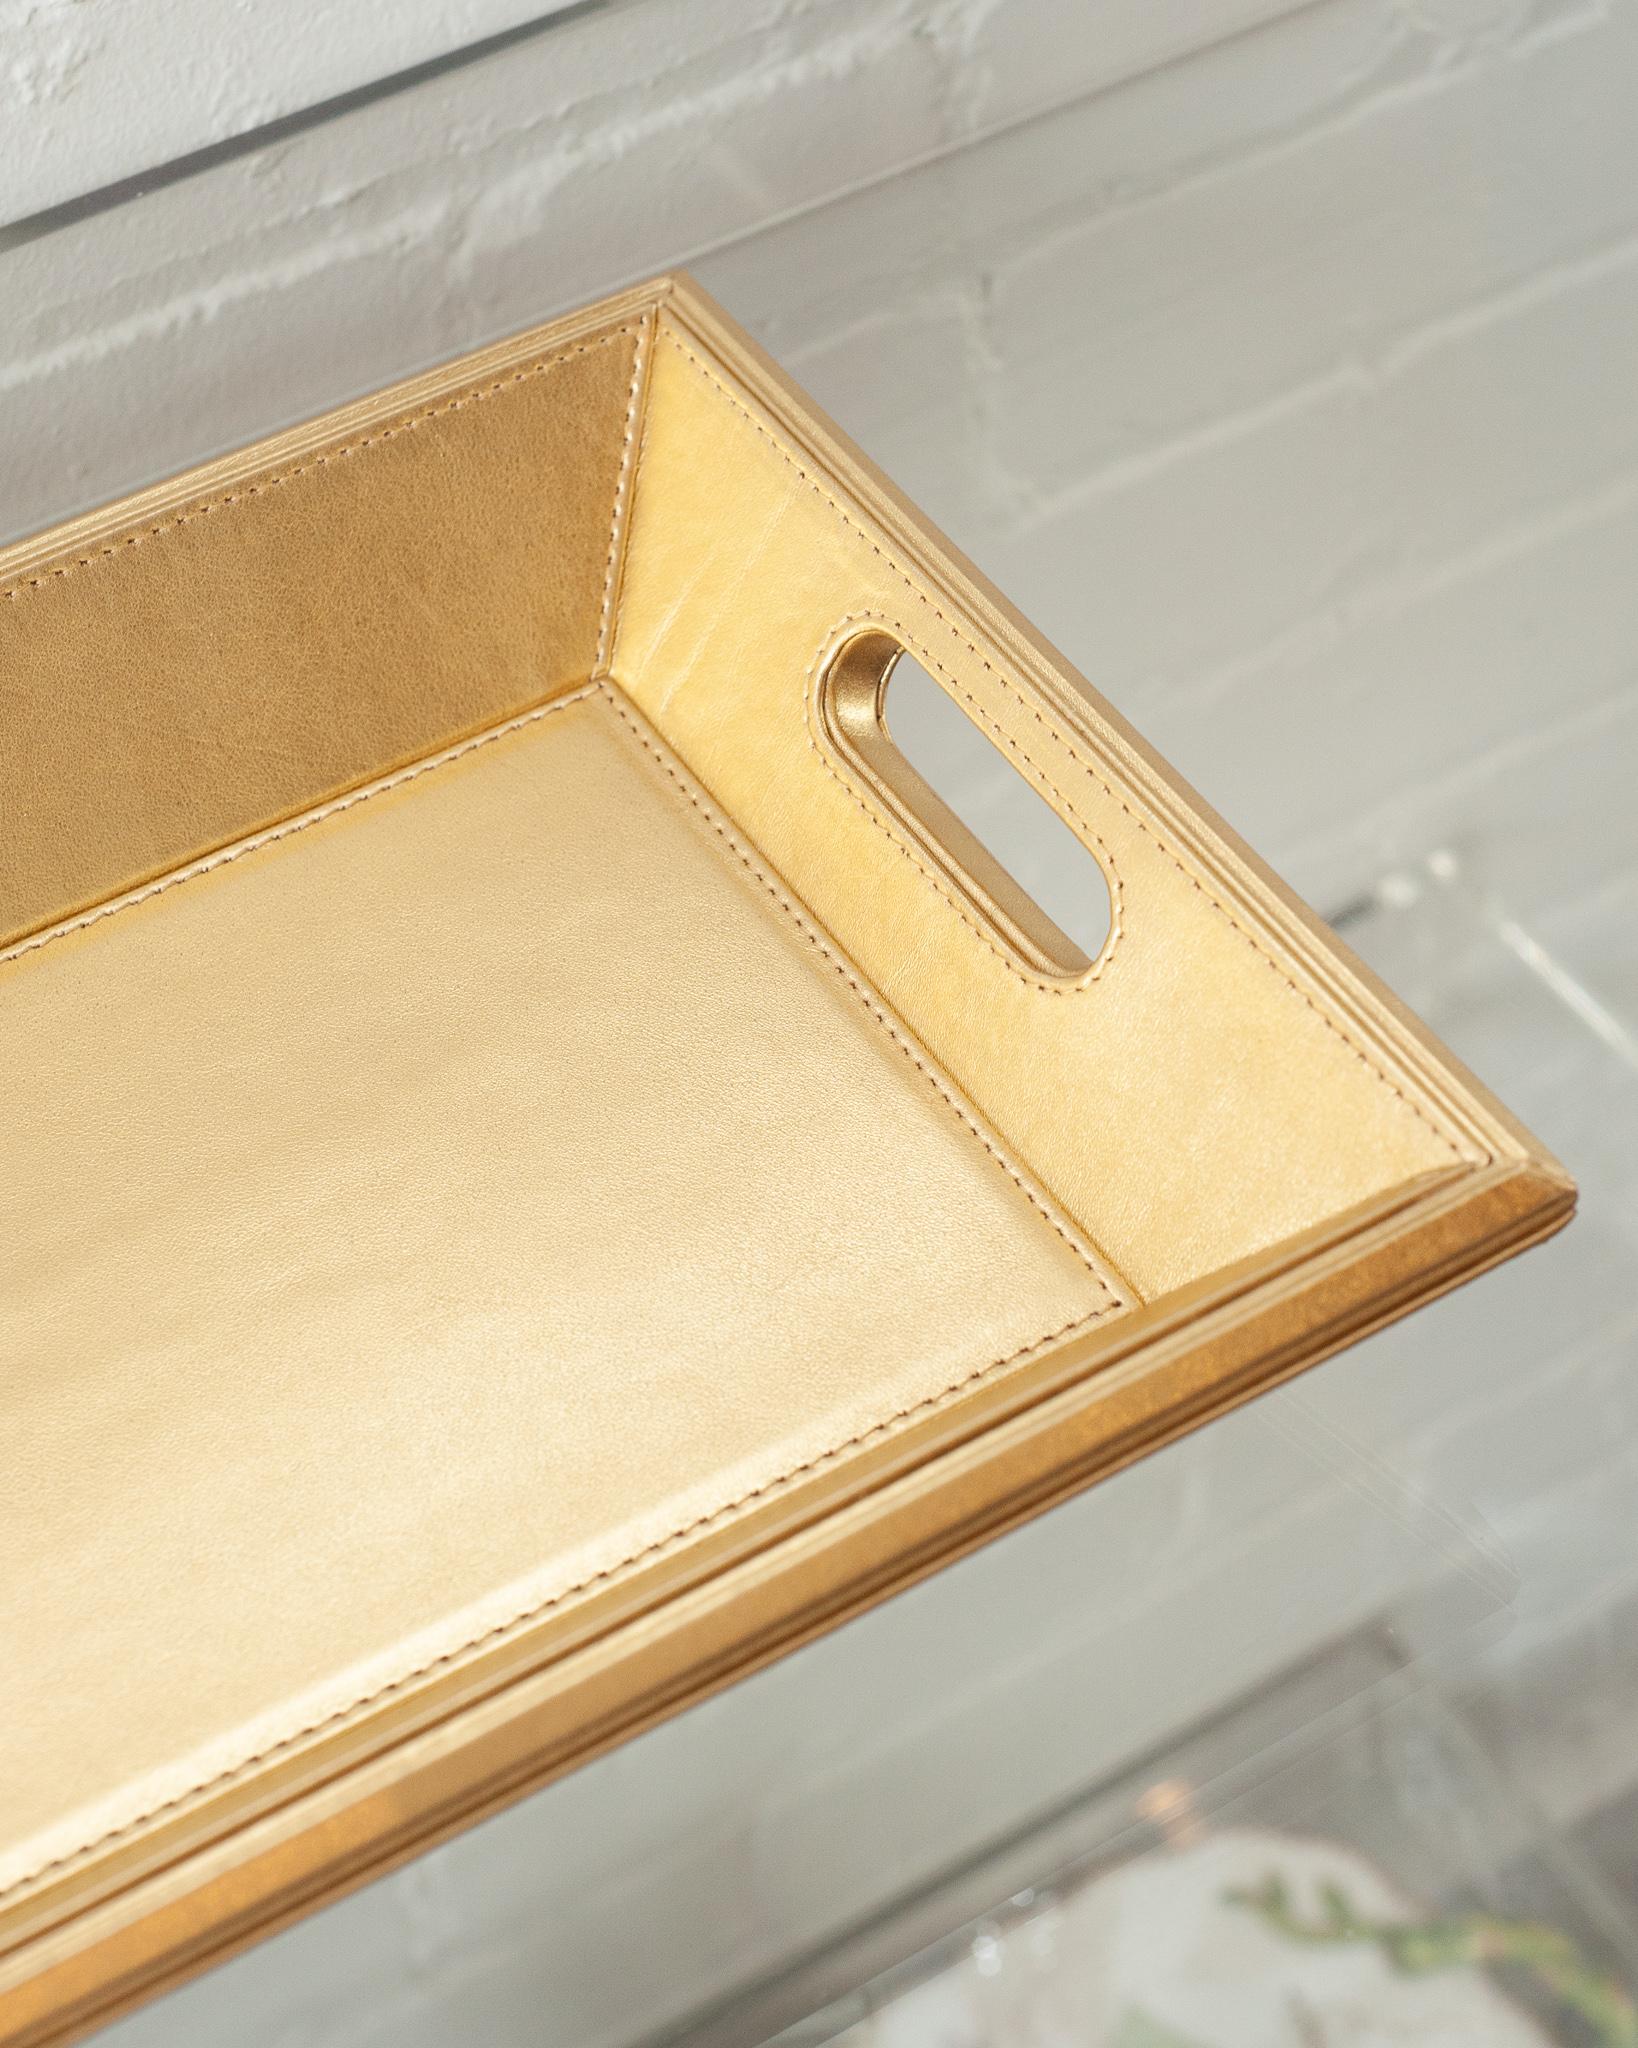 A beautiful metallic gold leather tray, perfect for the desk, bedside table, or use as a serving piece. Fully wrapped in embossed leather with stitched panels, each tray has two openings for carrying.